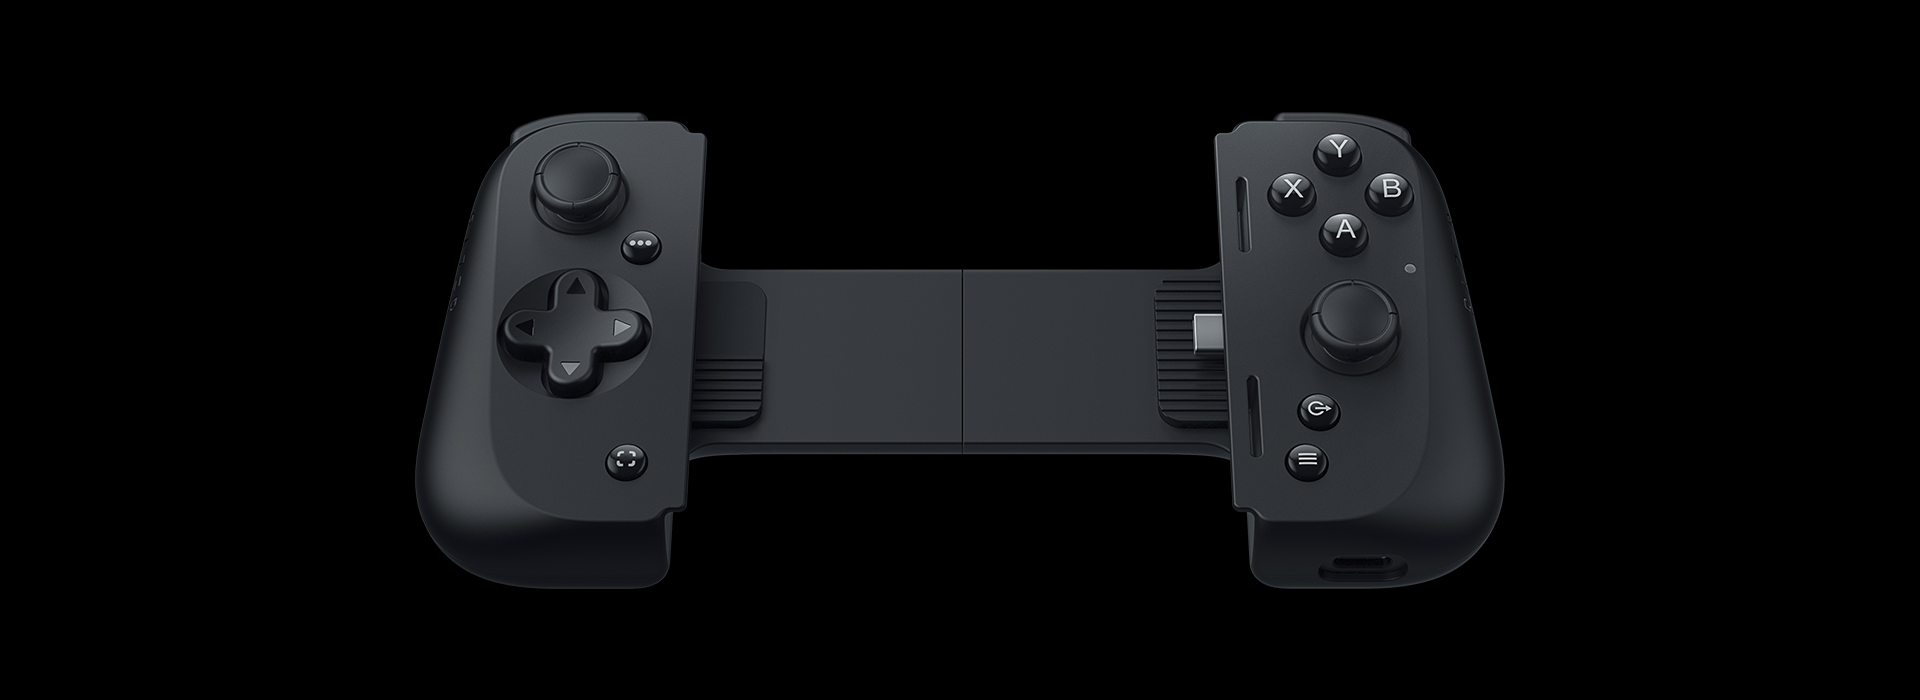 Review: Razer Kishi V2 refines the “gamepad that clamps to phone” concept